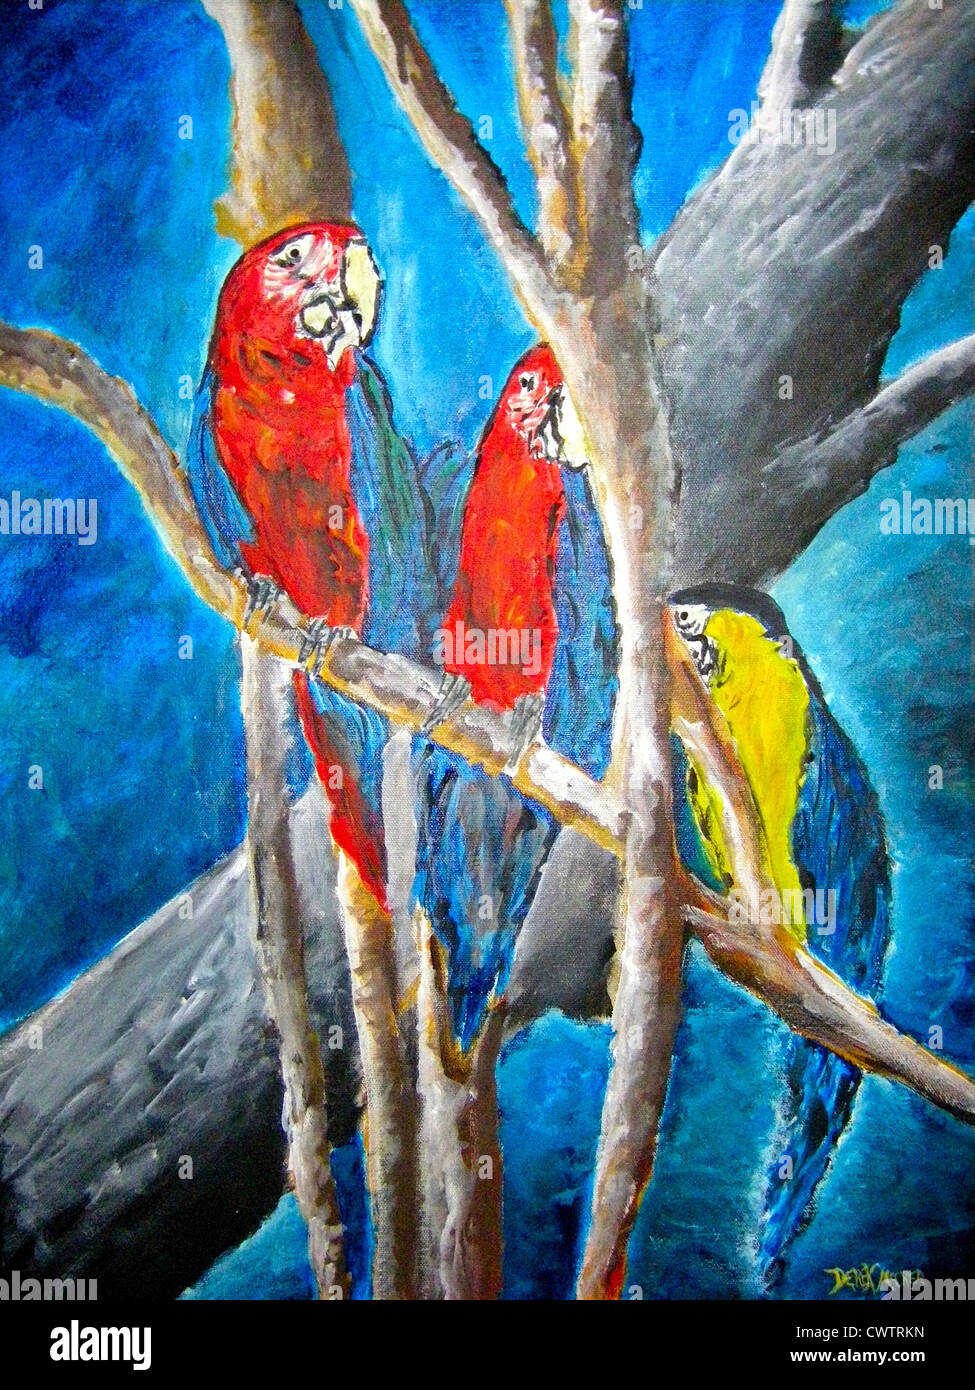 macaw oarrots red yellow and blue parrot acrylic painting modern art on canvas Stock Photo